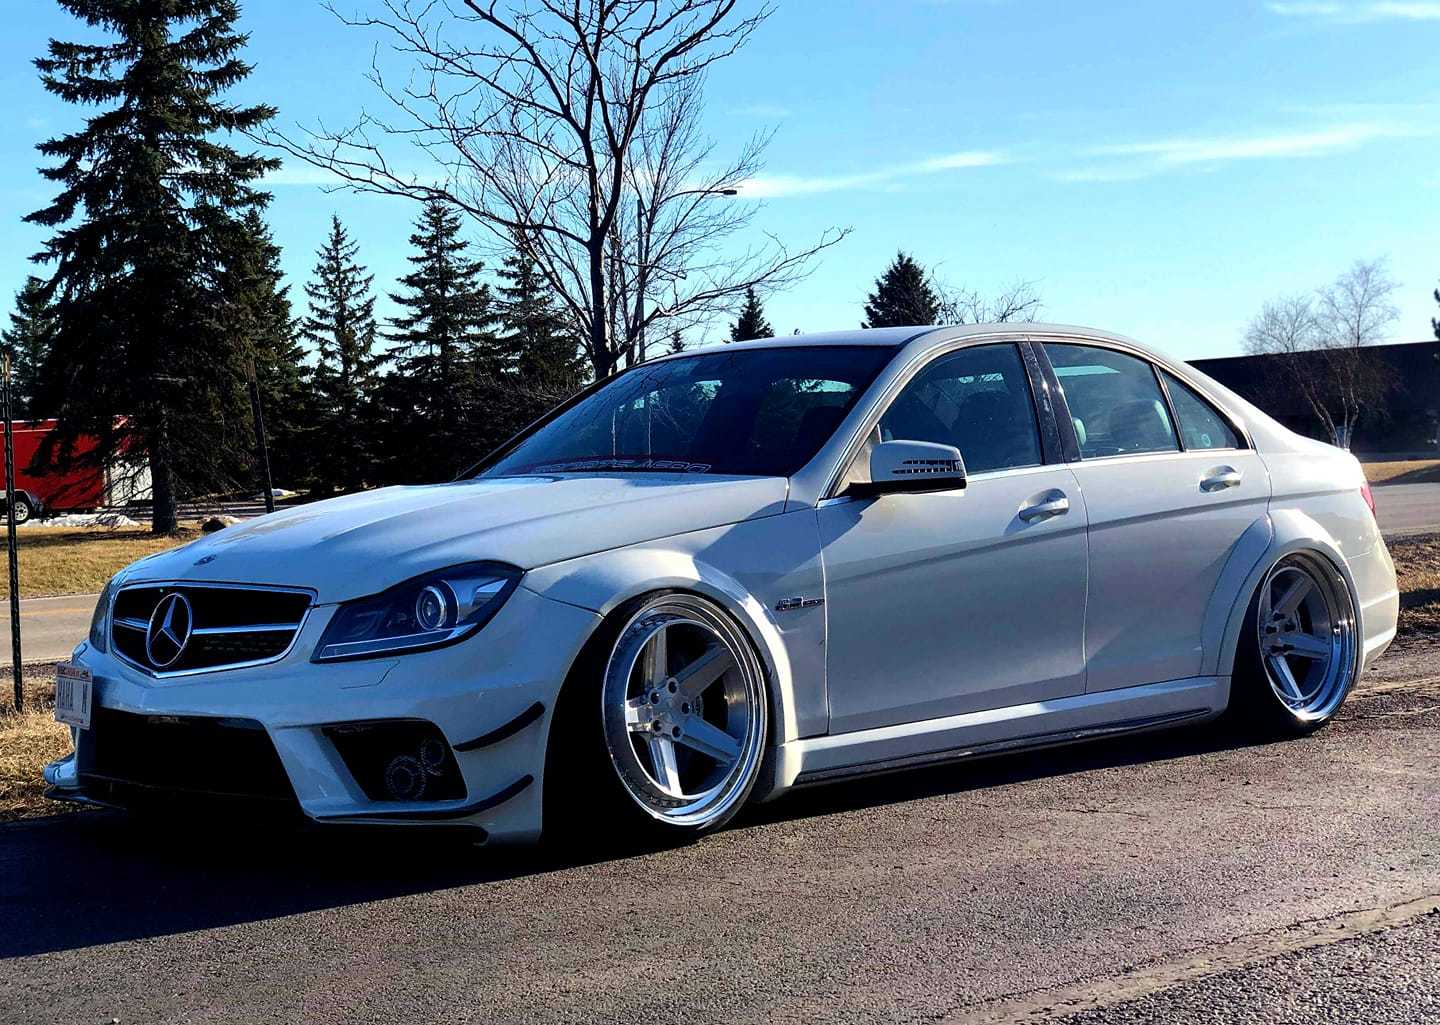 charles ho fung 2012 c63 amg august featured car of the month